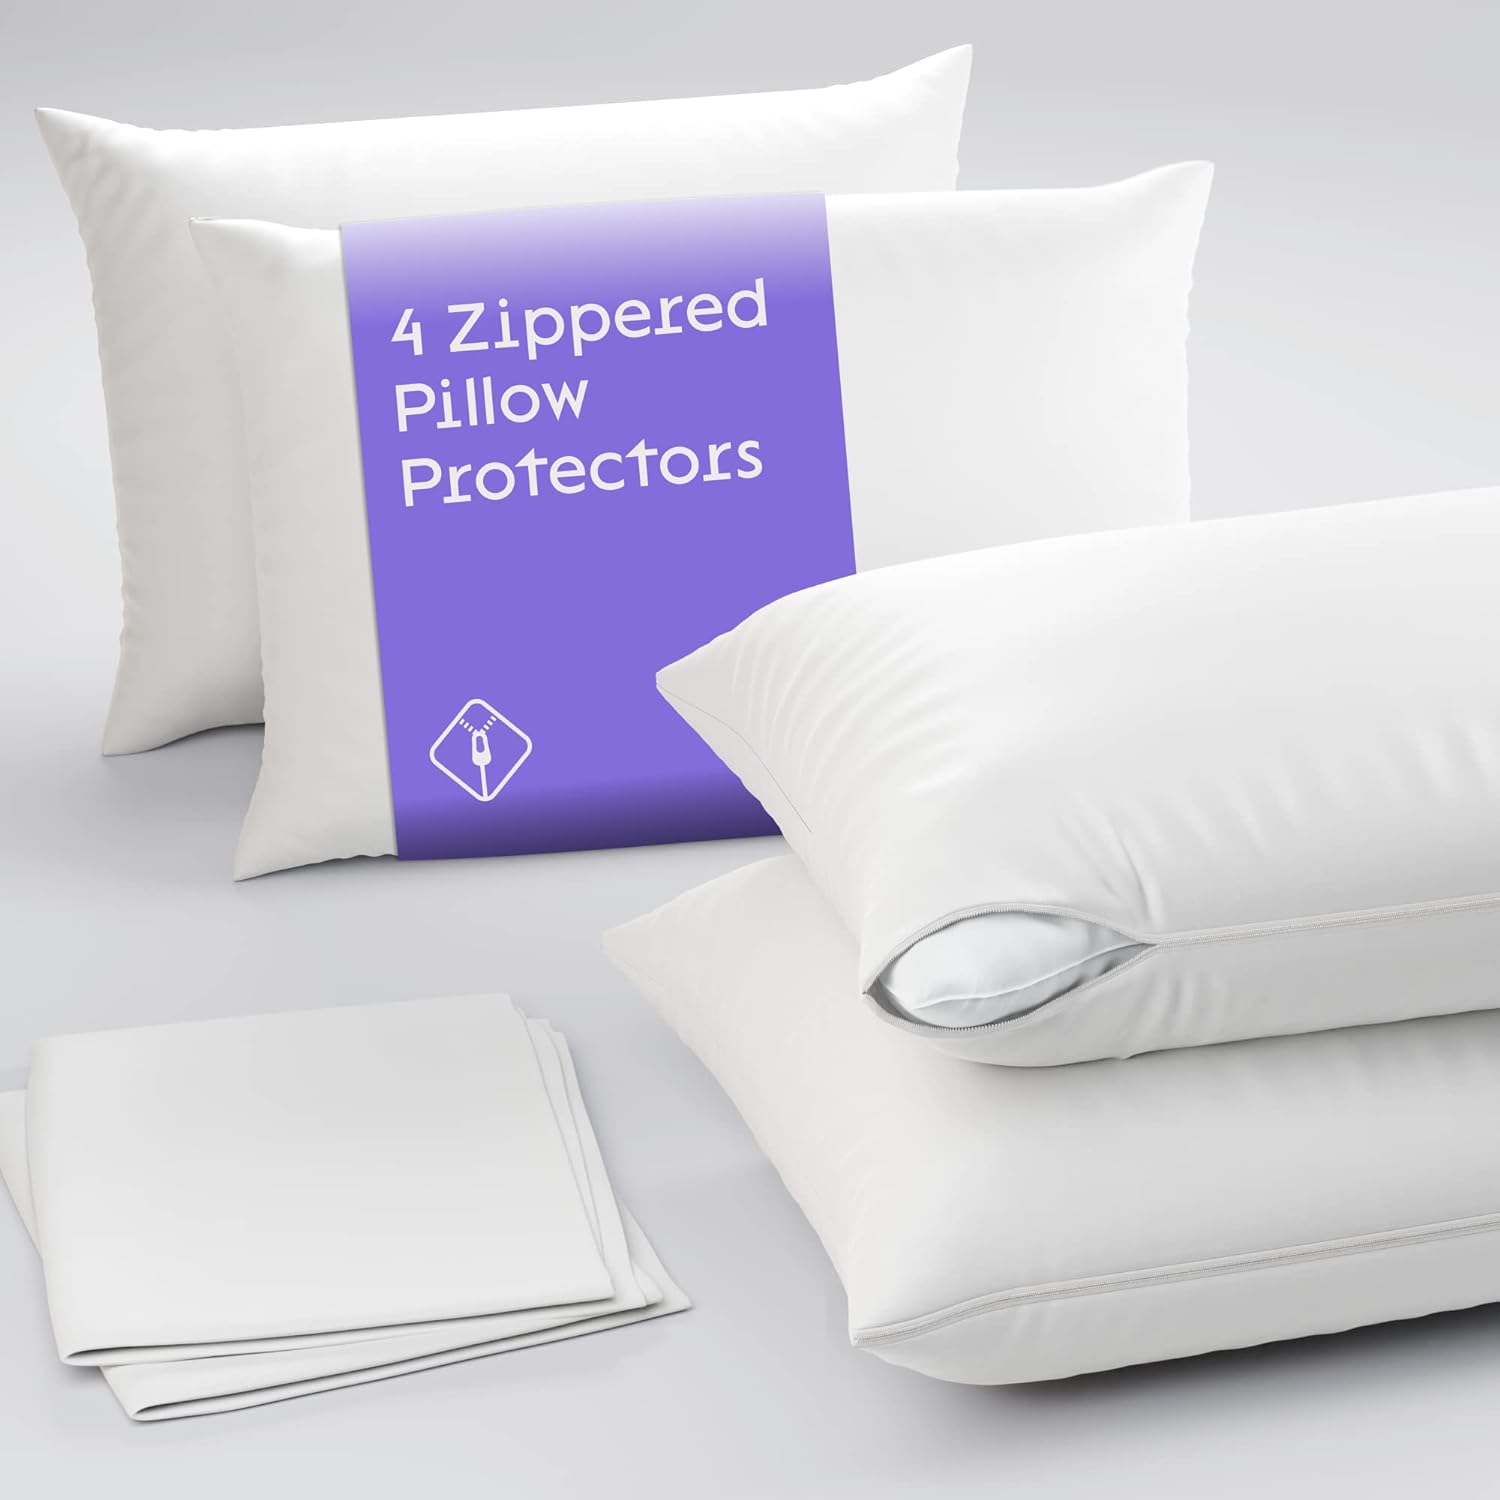 Niagara 4 Pack of Pillow Protectors with Zipper, Standard Size, Effective Dust Protection, Quiet, Stay in Place Pillow Covers, Breathable Case for Pillow Lifespan Extension (20x26 Inches)